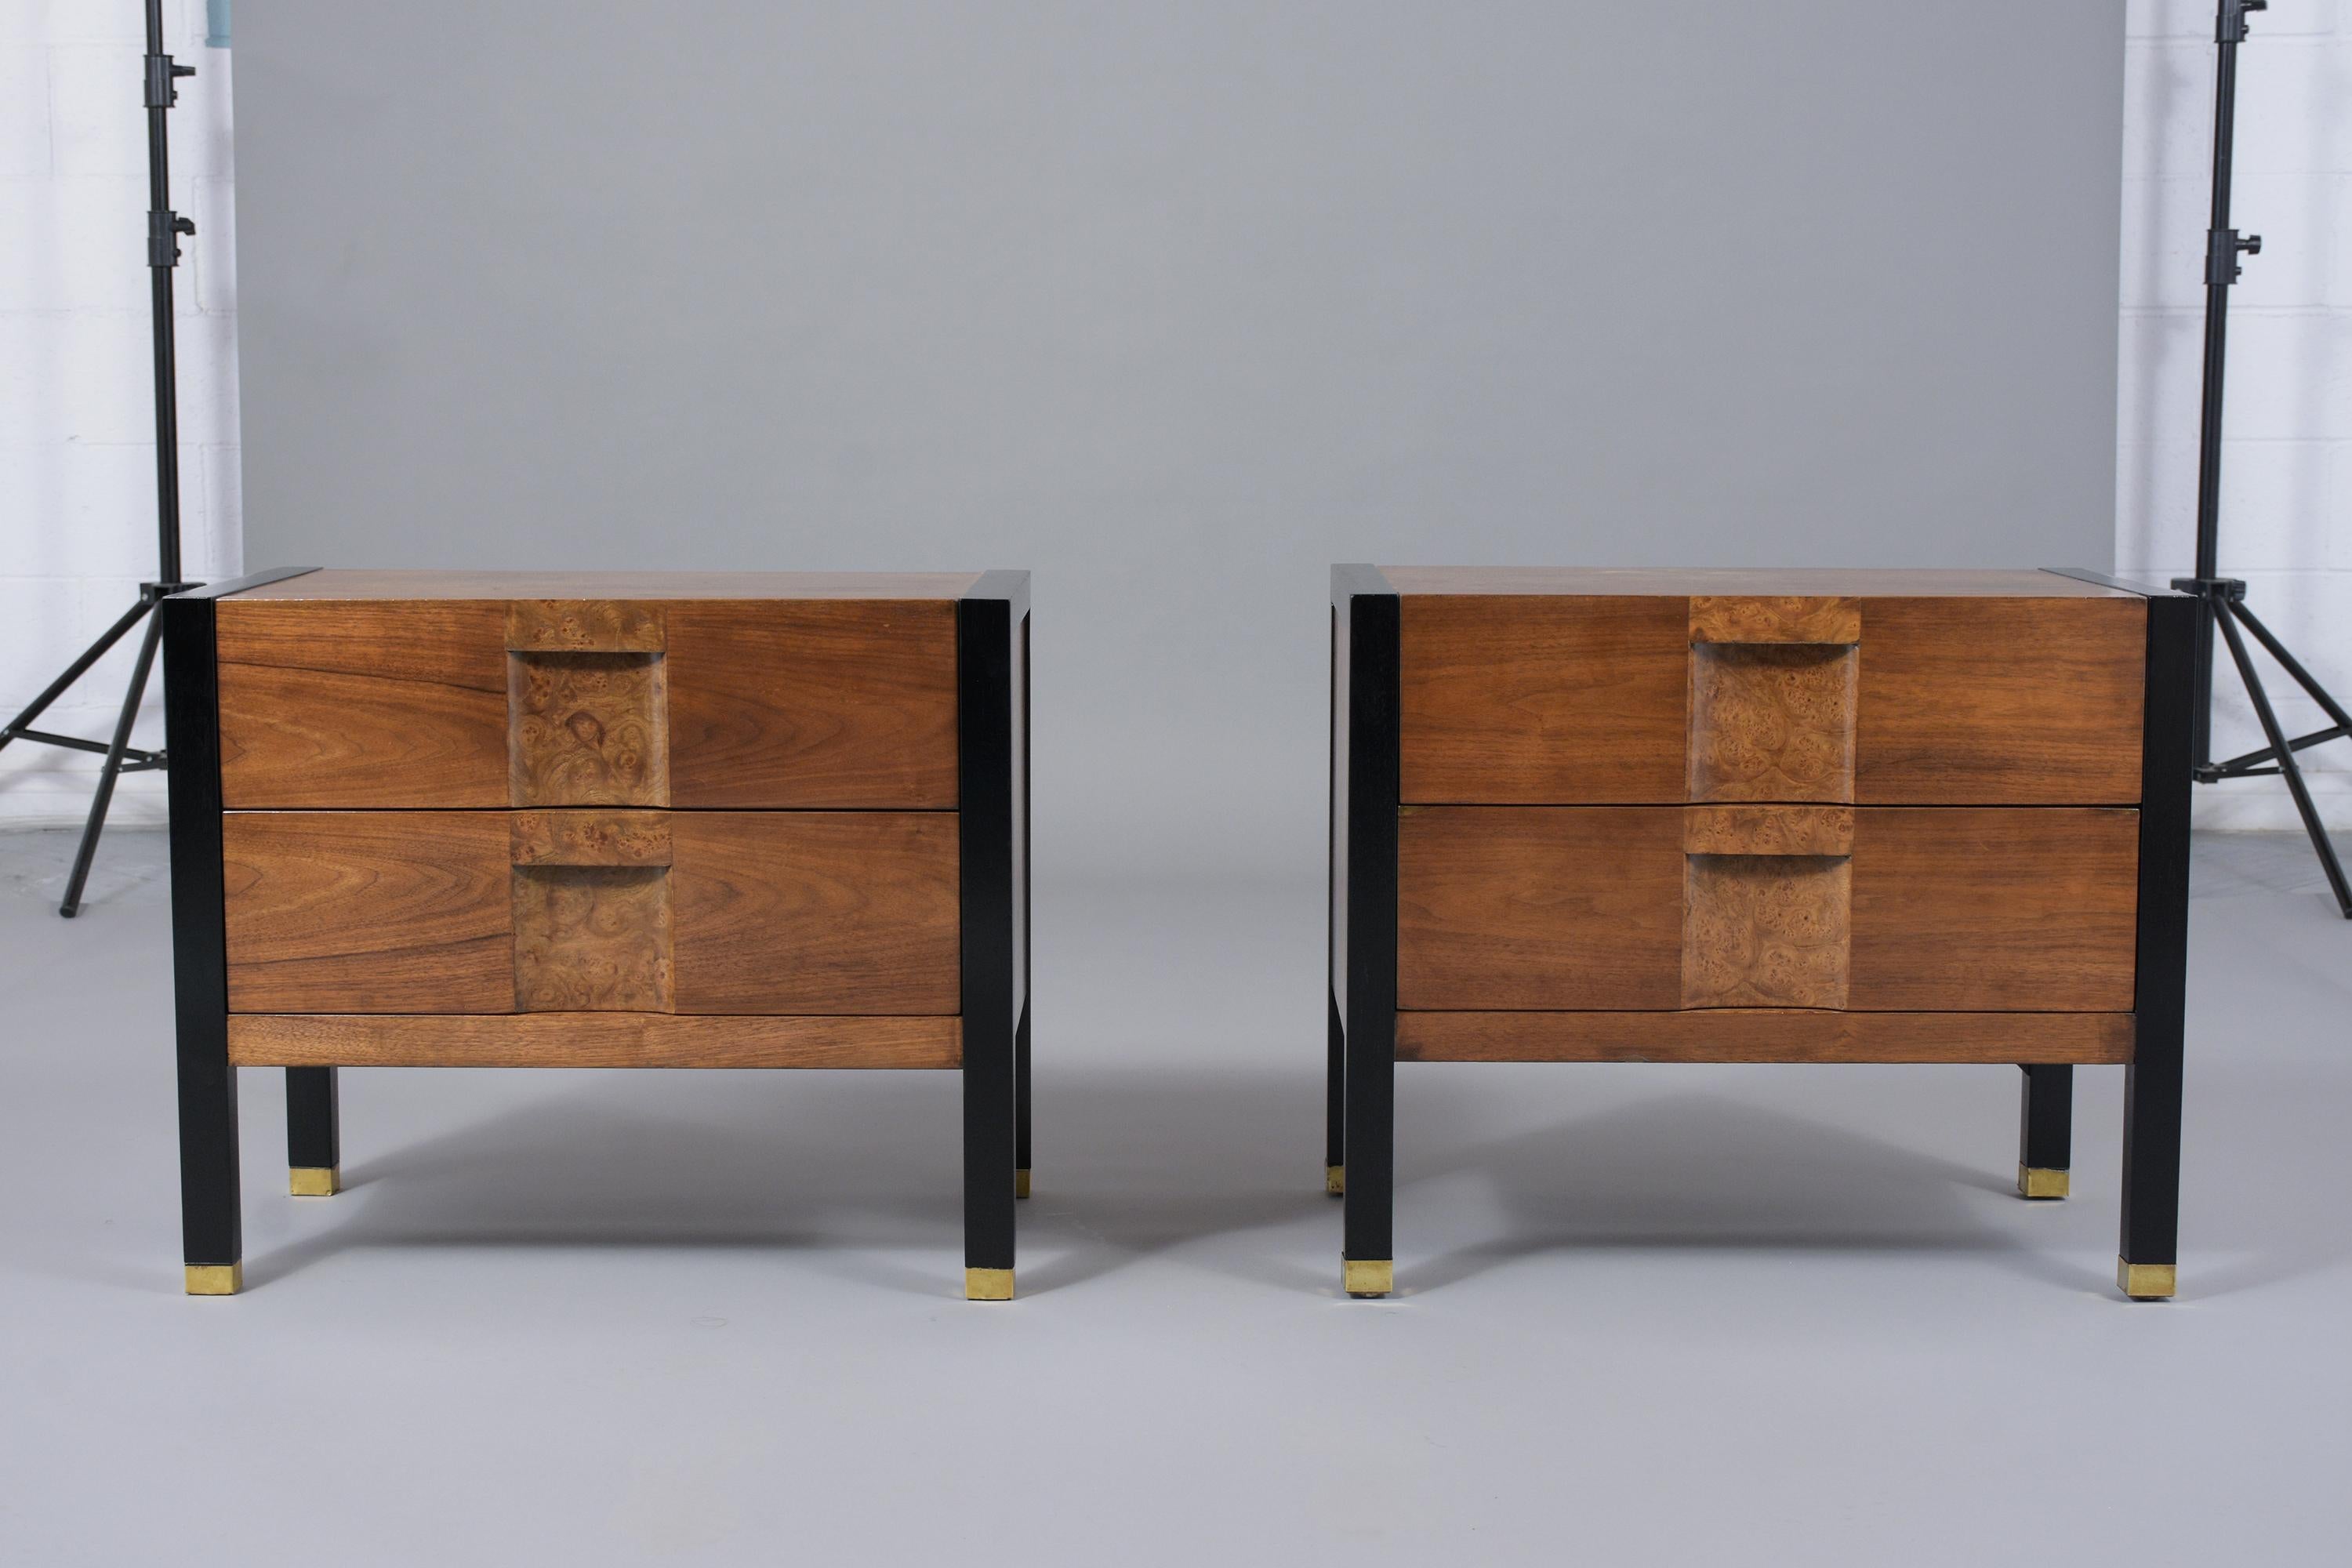 A remarkable Pair of Mid-Century Modern nightstands hand-crafted out of walnut features a new walnut and ebonized color with a lacquer finish and are professionally restored. The end tables have burled veneer details in the center of the two drawers